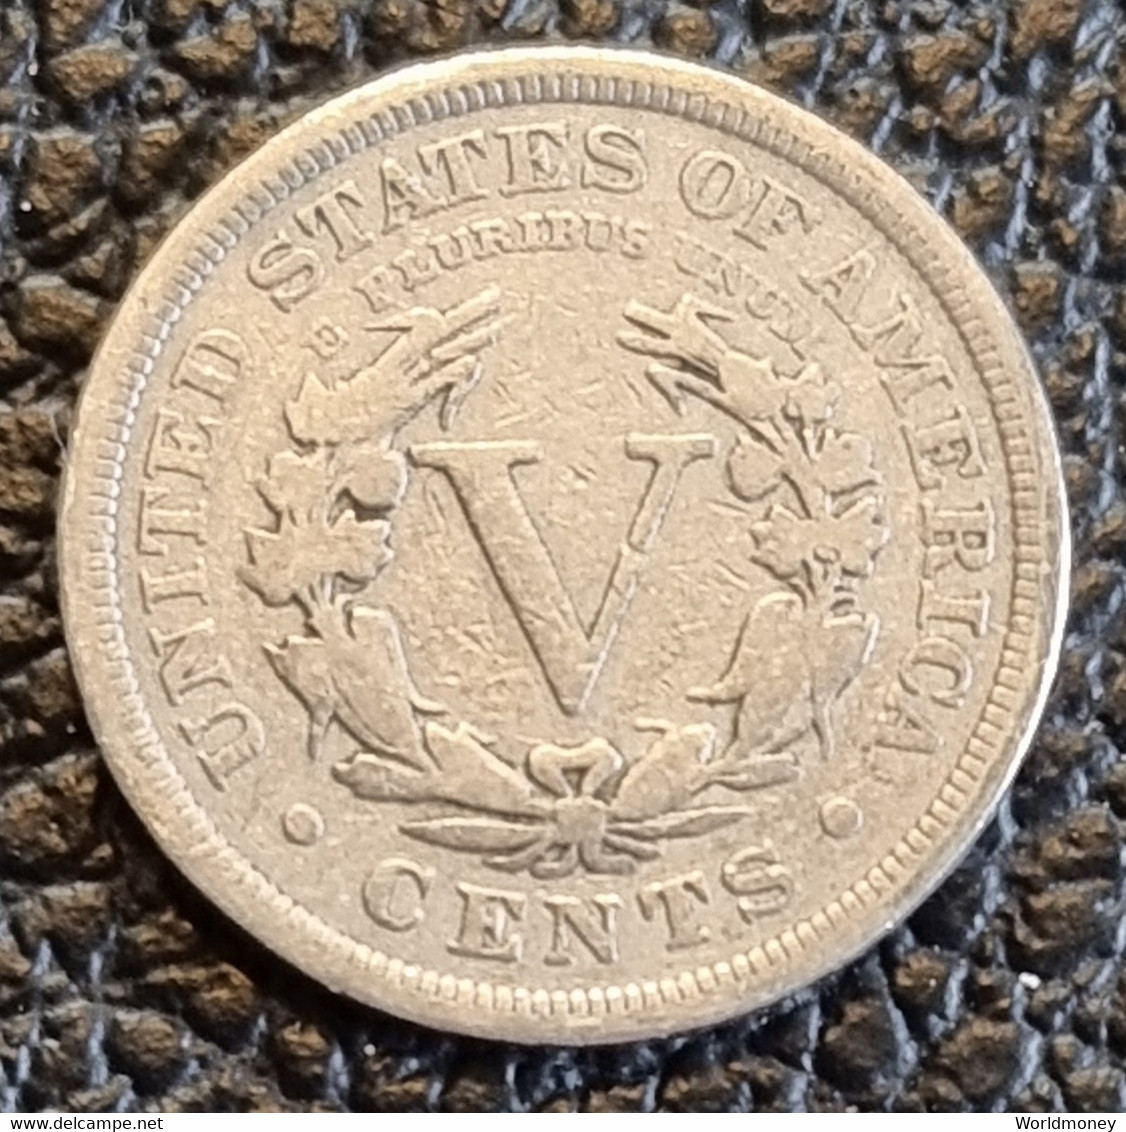 United States 5 Cents 1904 - 1883-1913: Liberty